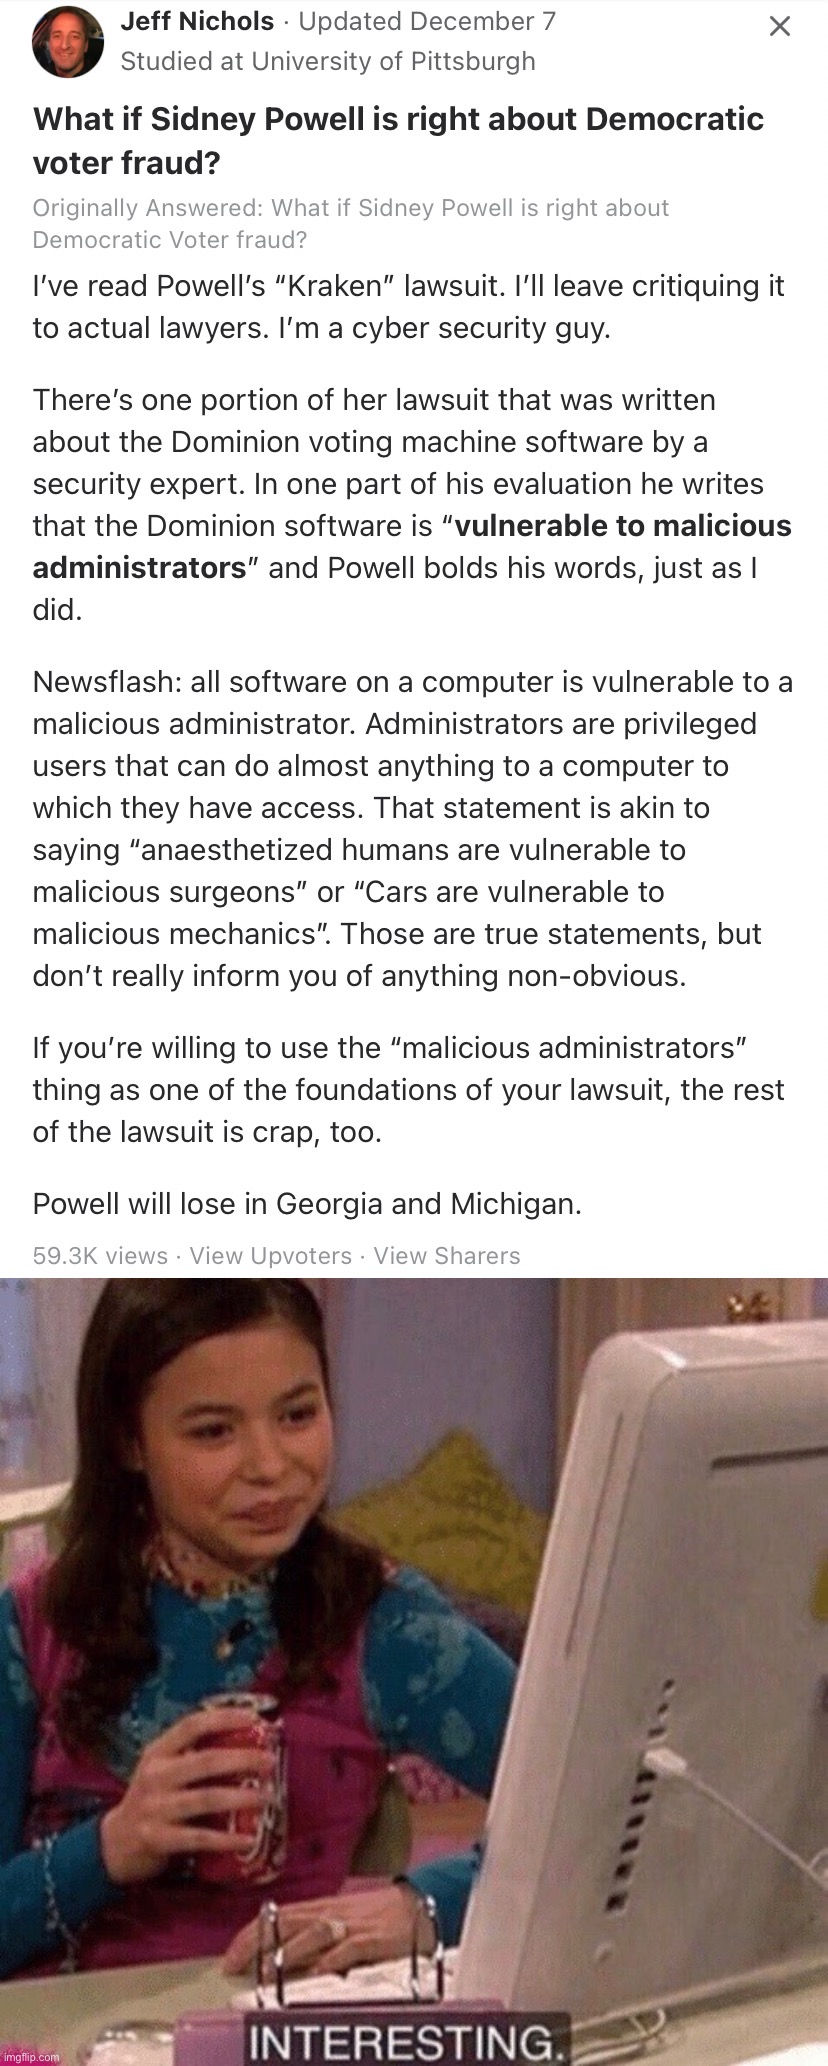 Things that make you go hmmm | image tagged in quora sidney powell malicious administrators,icarly interesting | made w/ Imgflip meme maker